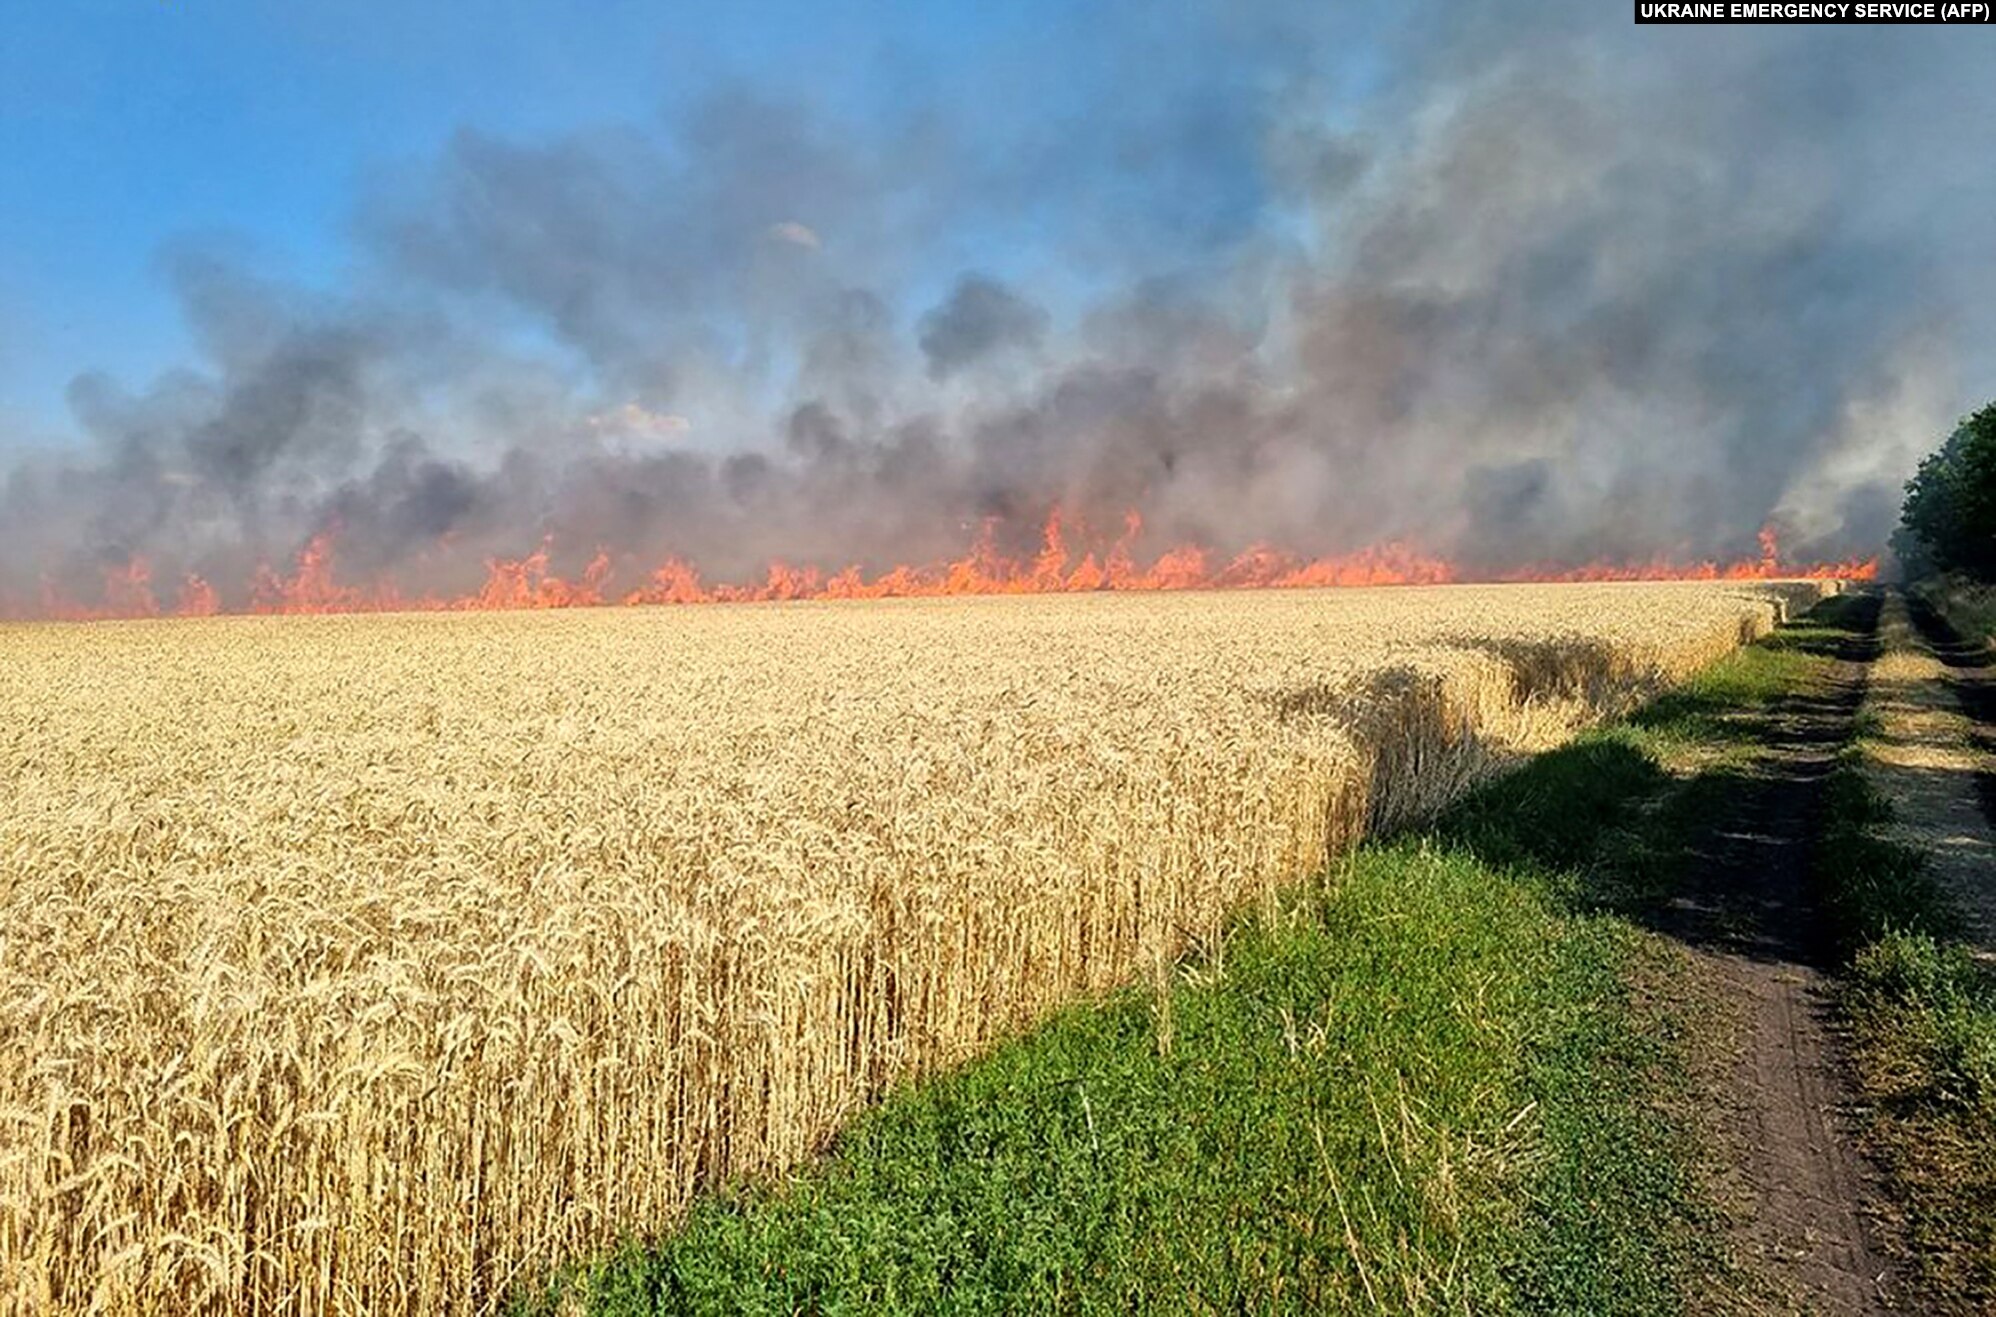 A line of fire blazes through a wheat field in the Mykolayiv region on 17 July 2022. Such fires have become increasingly common as the summer sun bakes Ukraine’s wheat-growing plains dry. Photo: Ukraine Emergency Service / AFP